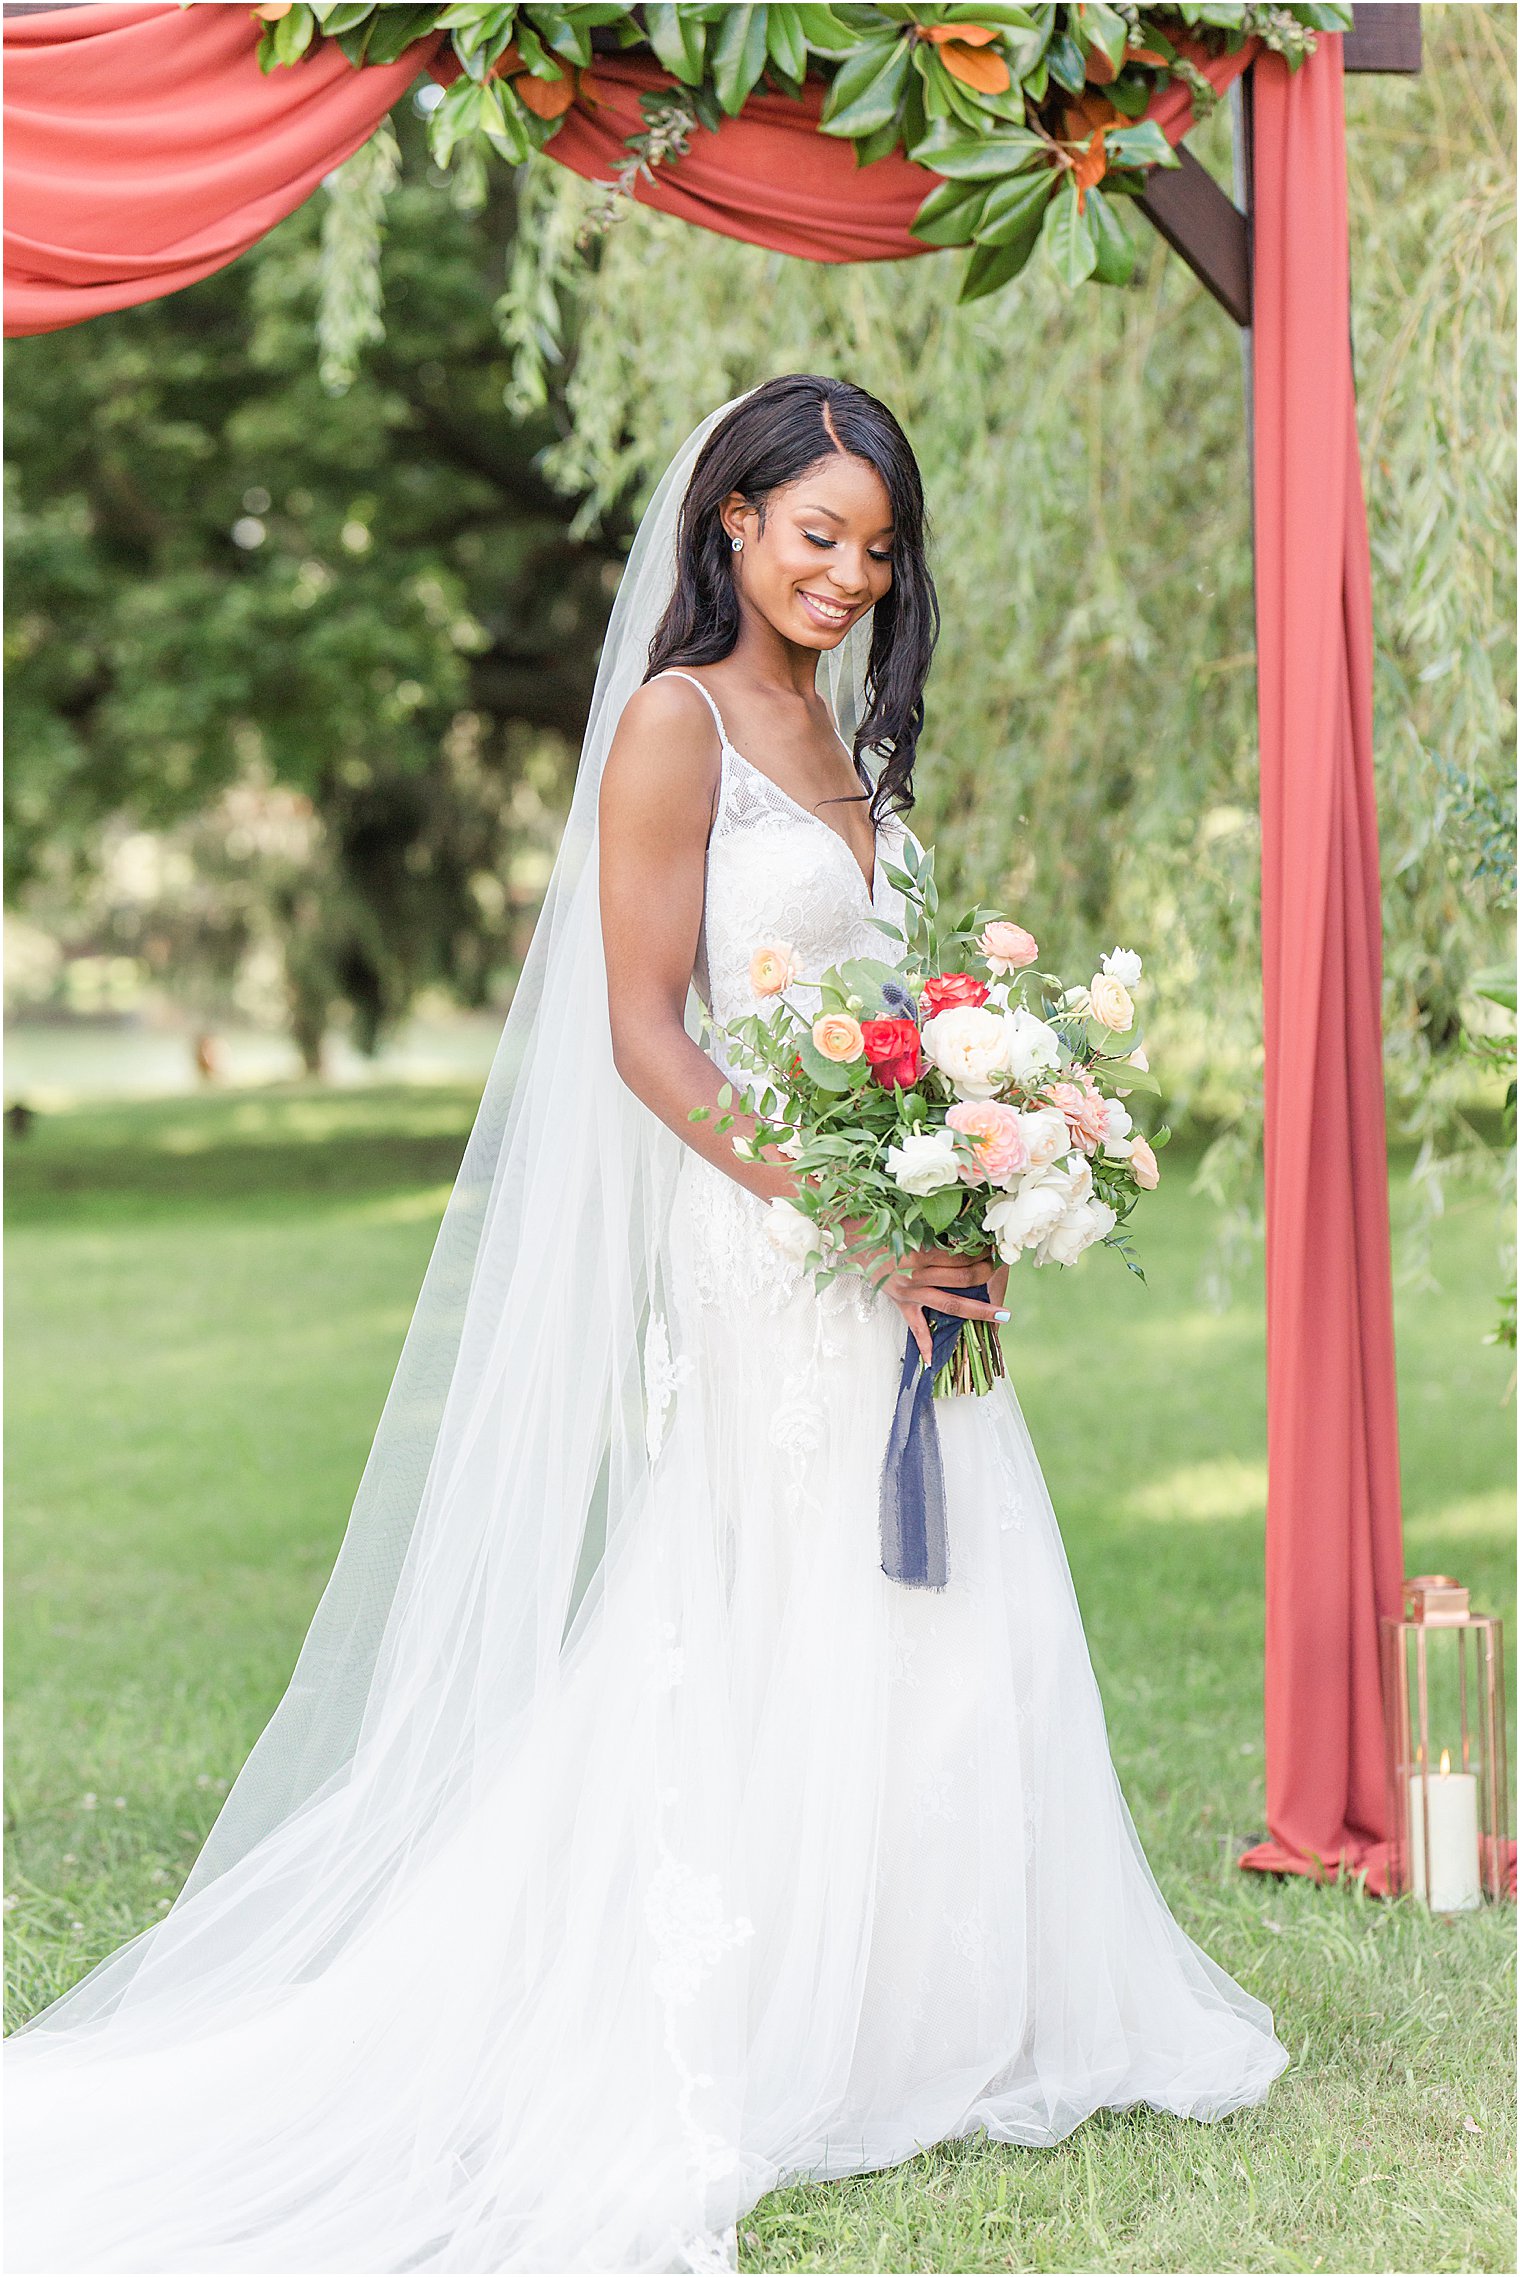 Bride holding her bouquet of flowers during wedding editorial 